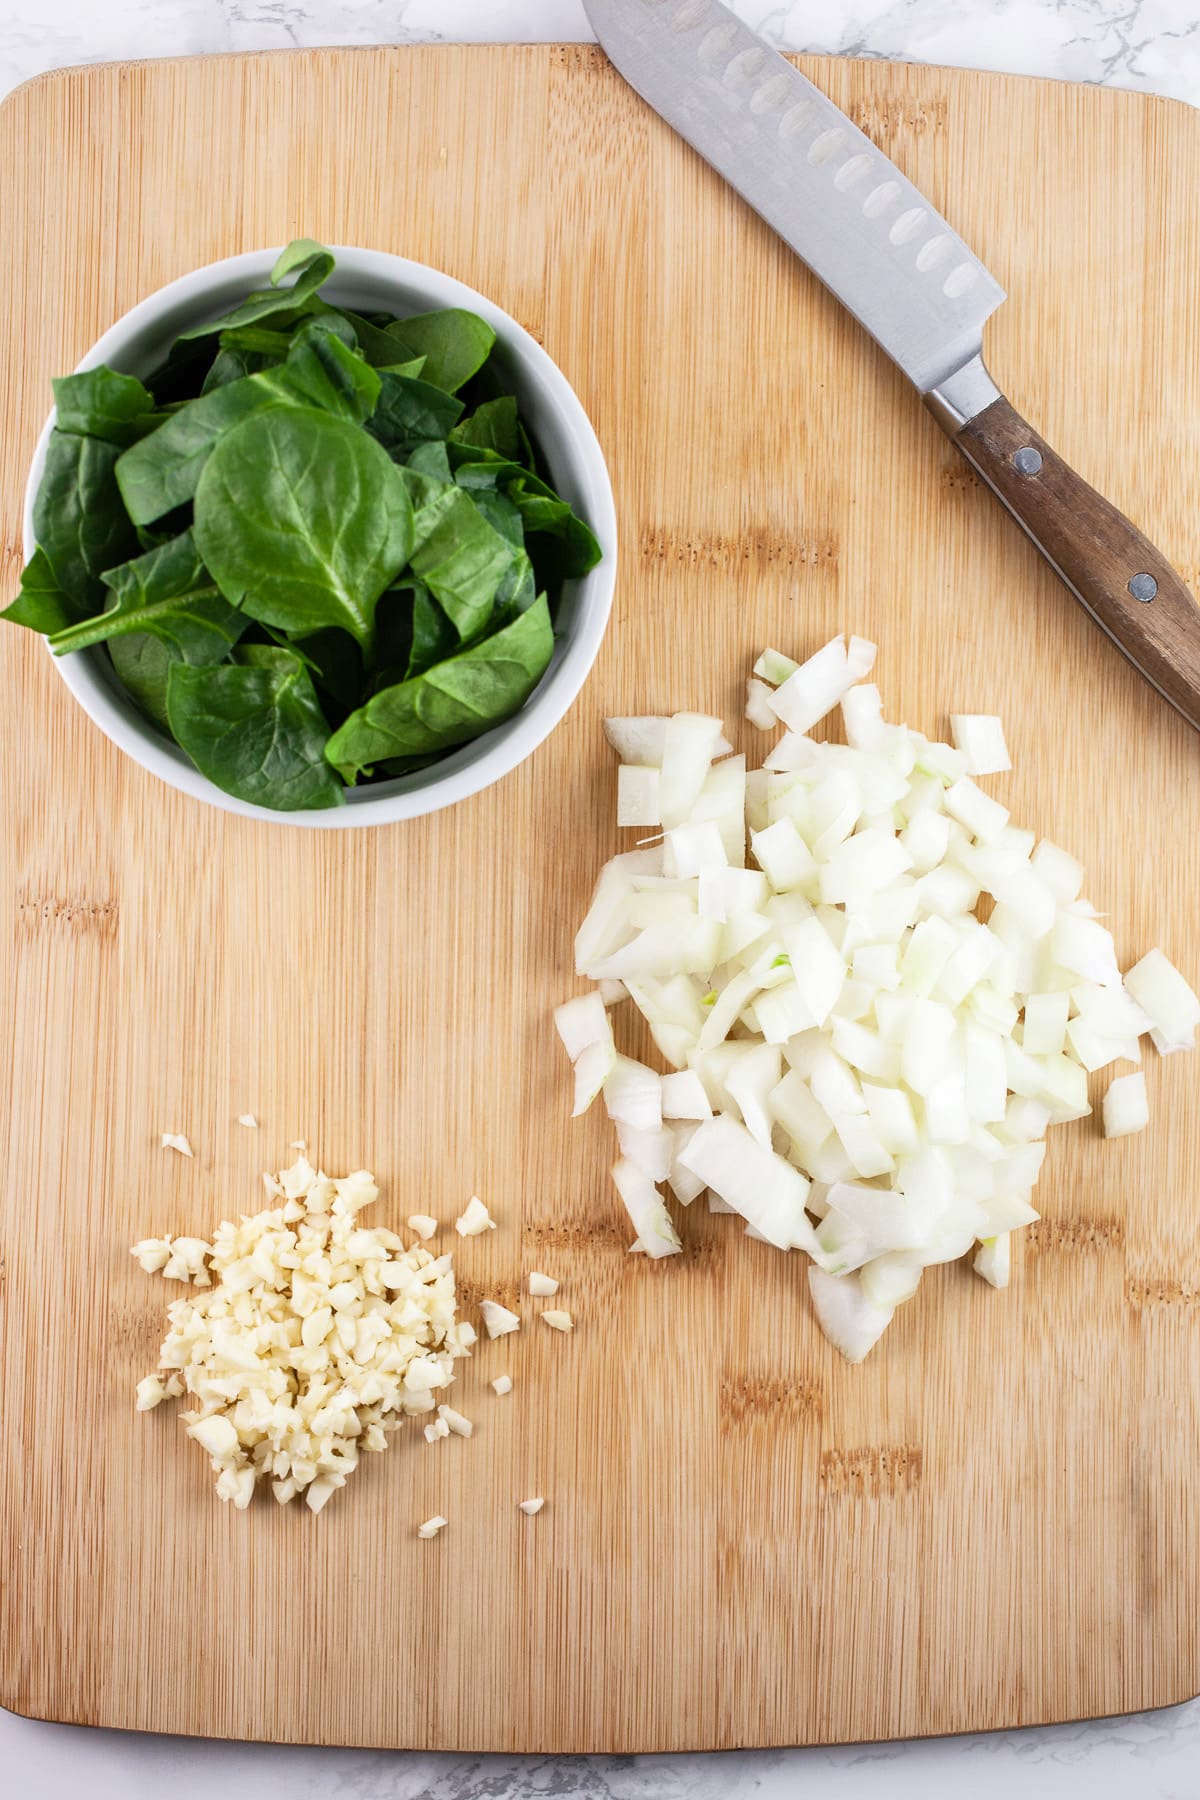 Minced garlic, onions, and spinach on wooden cutting board with knife.